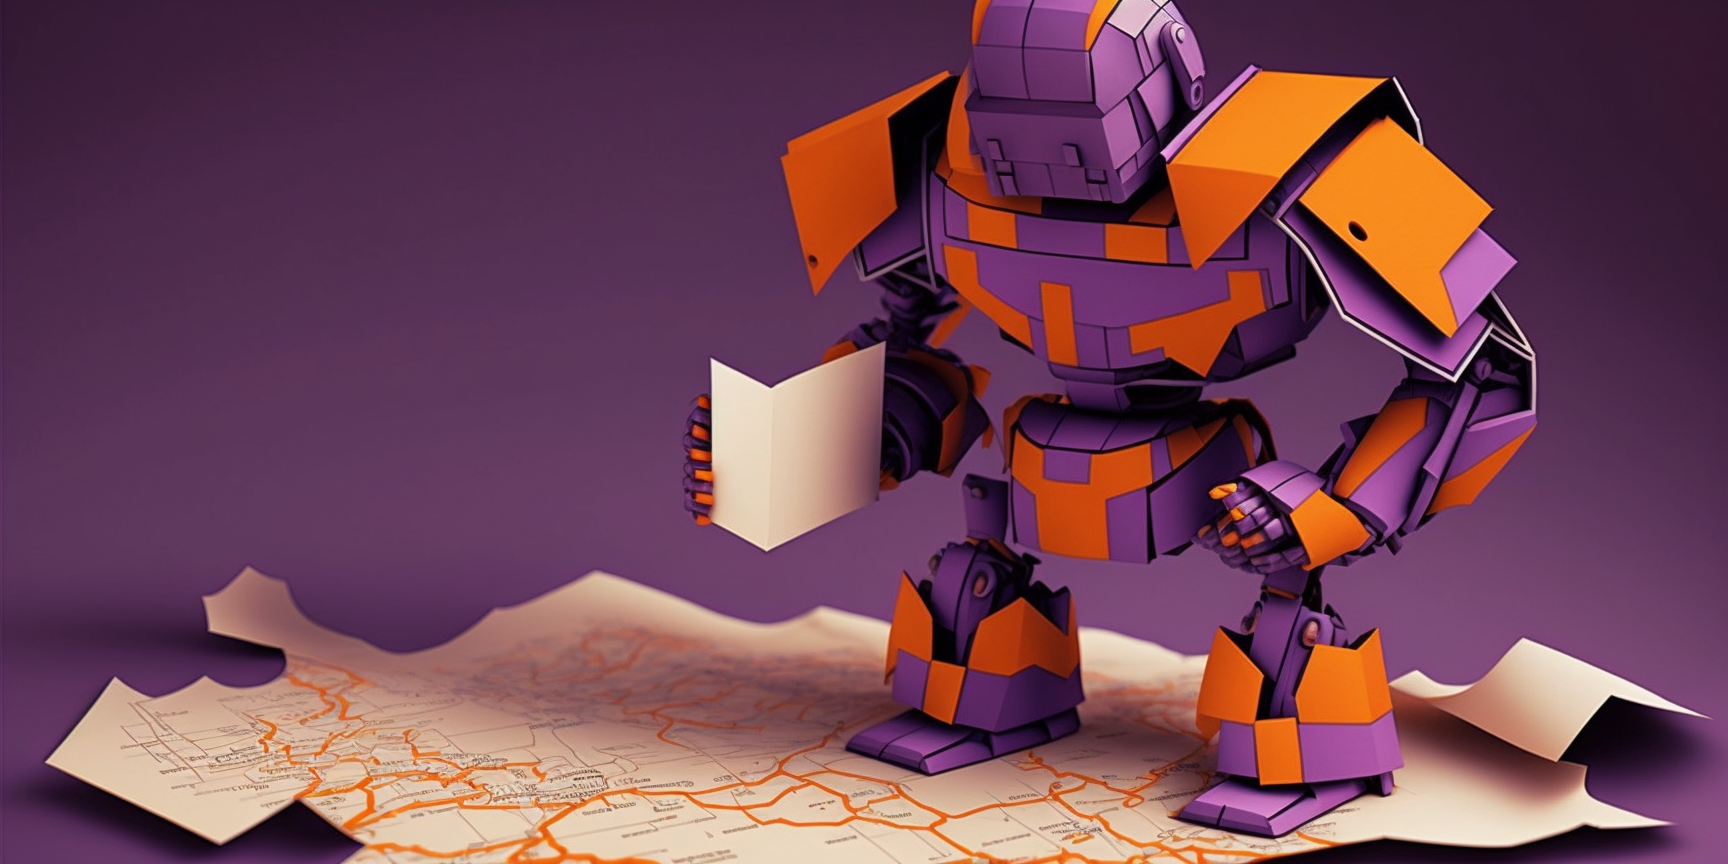 A robot looking at a large map.